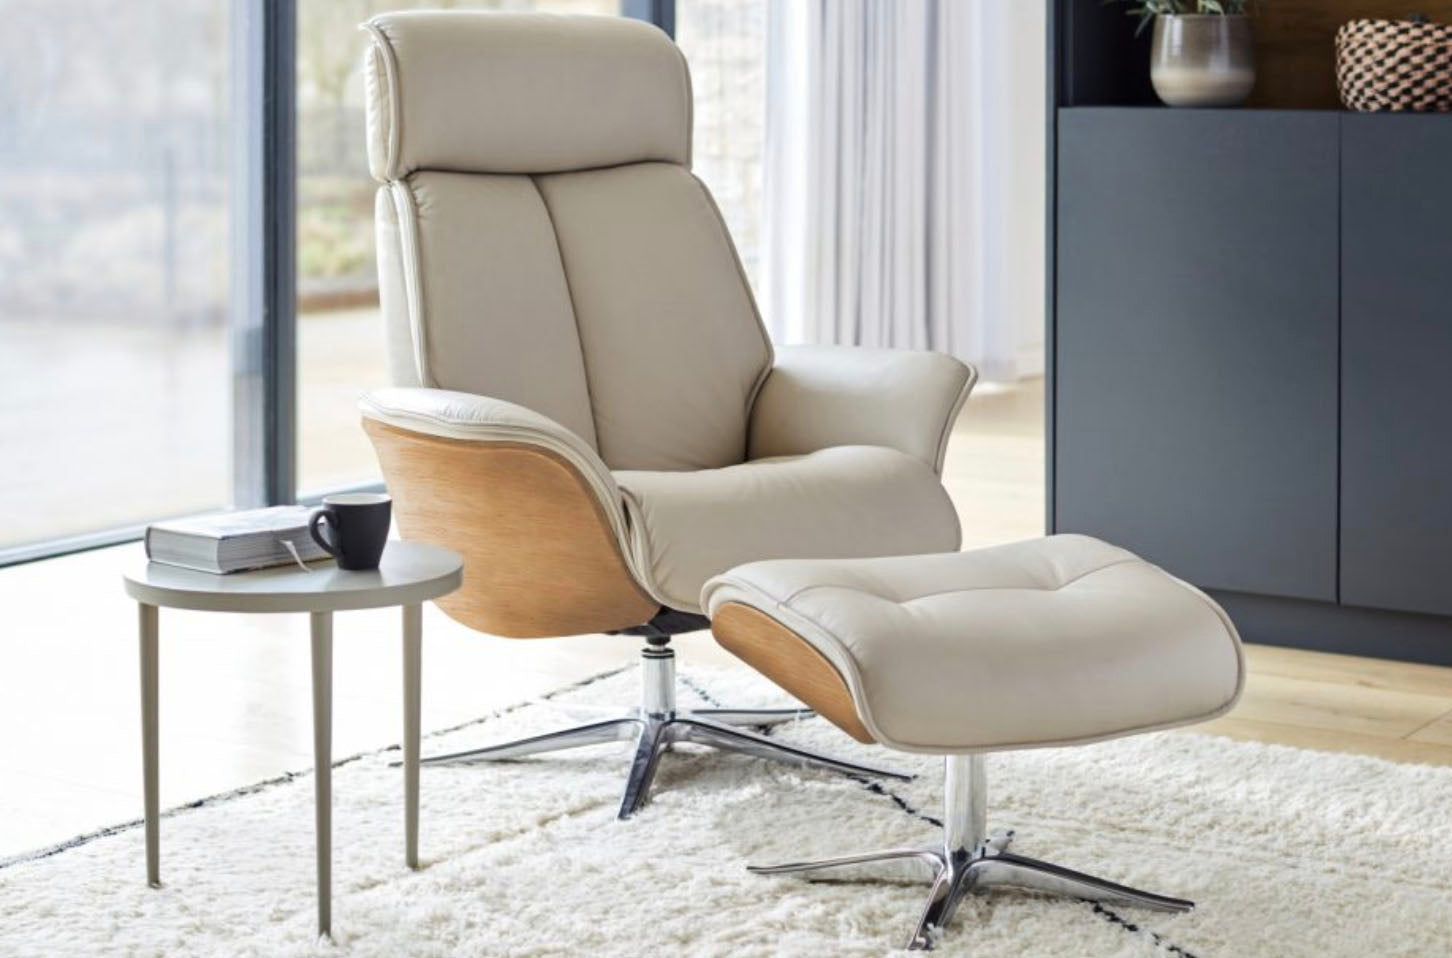 G Plan Ergo-Form Lund Manual Recliner Armchair With Full Wood Side